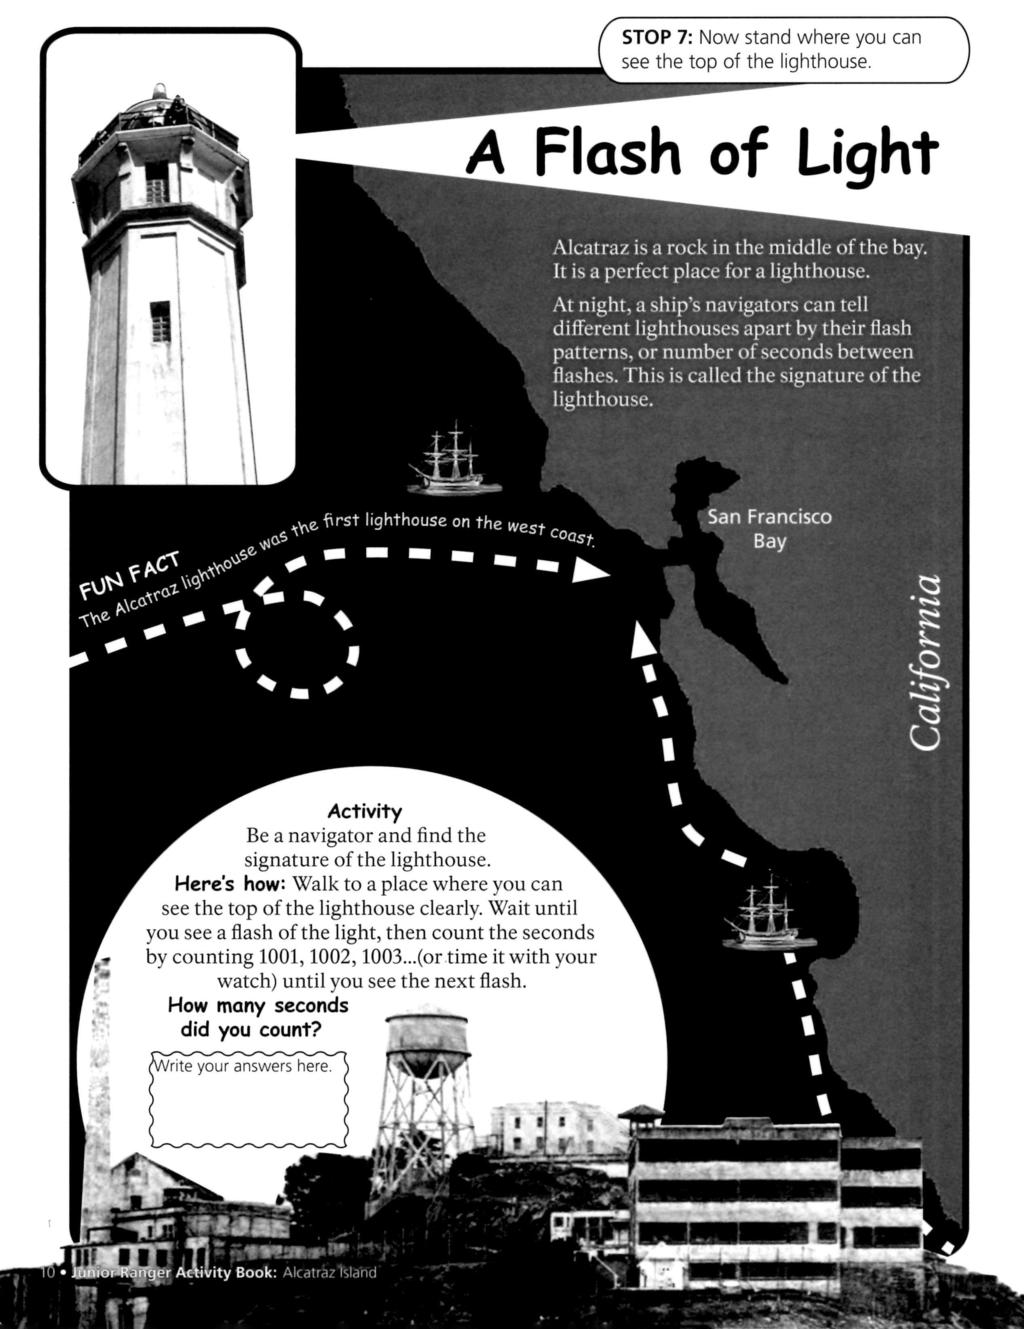 STOP 7: Now stand where you can see the top of the lighthouse. A Flash of Light Alcatraz is a rock in the middle of the bay. It is a perfect place for a lighthouse.